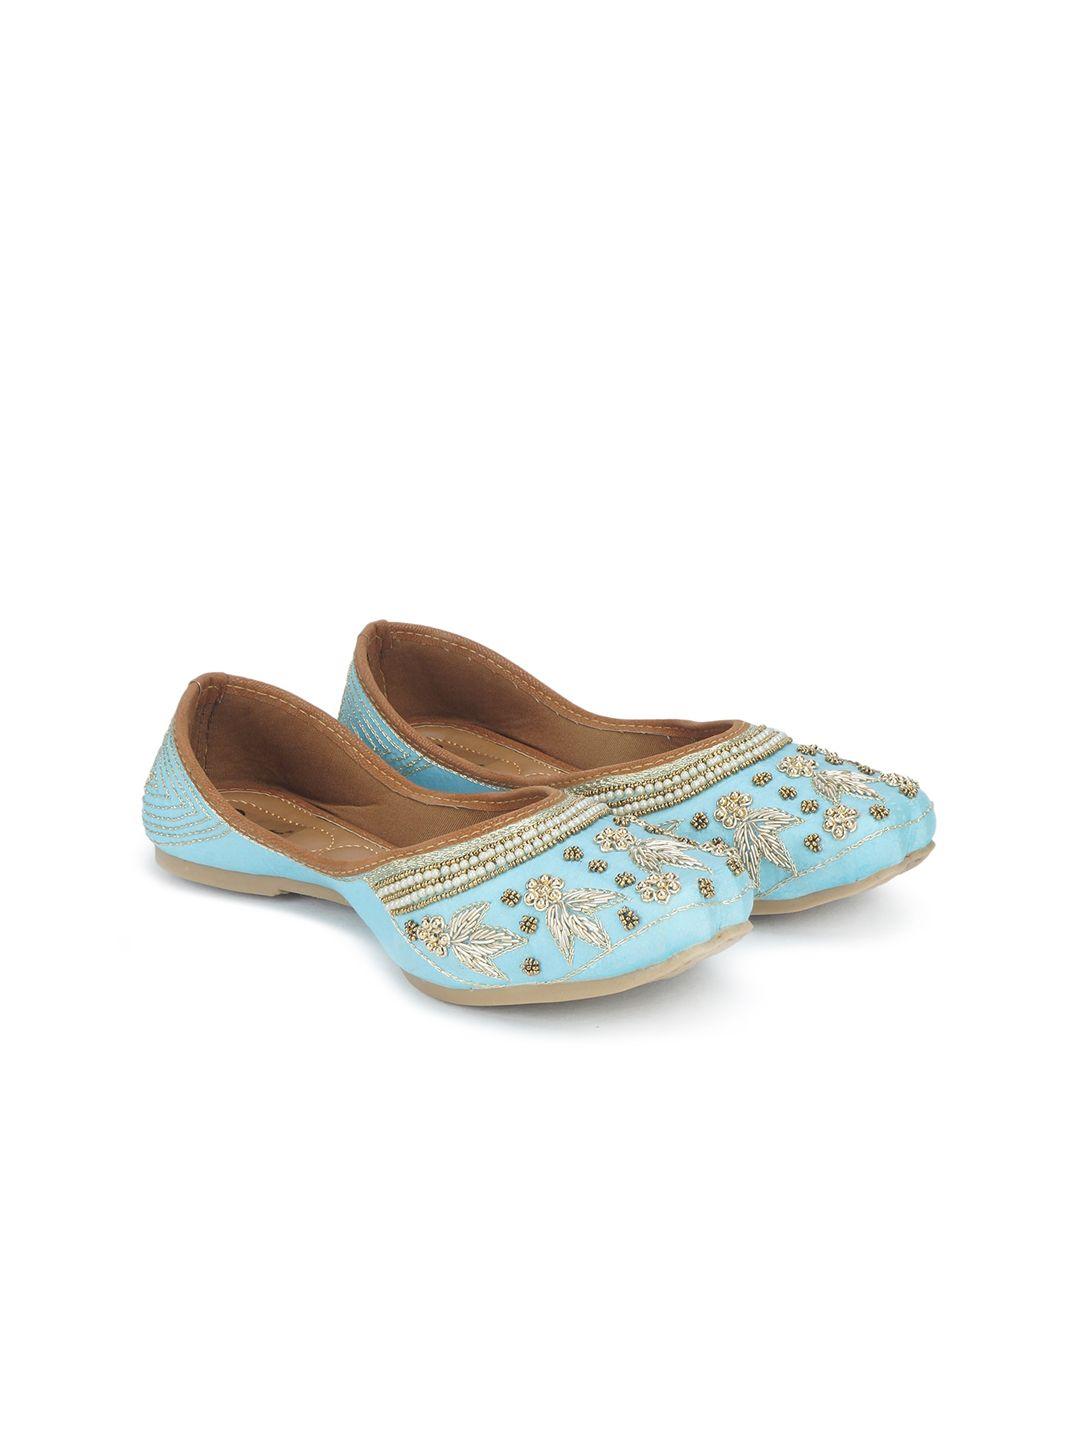 the-desi-dulhan-women-blue-embellished-leather-party-mojaris-flats